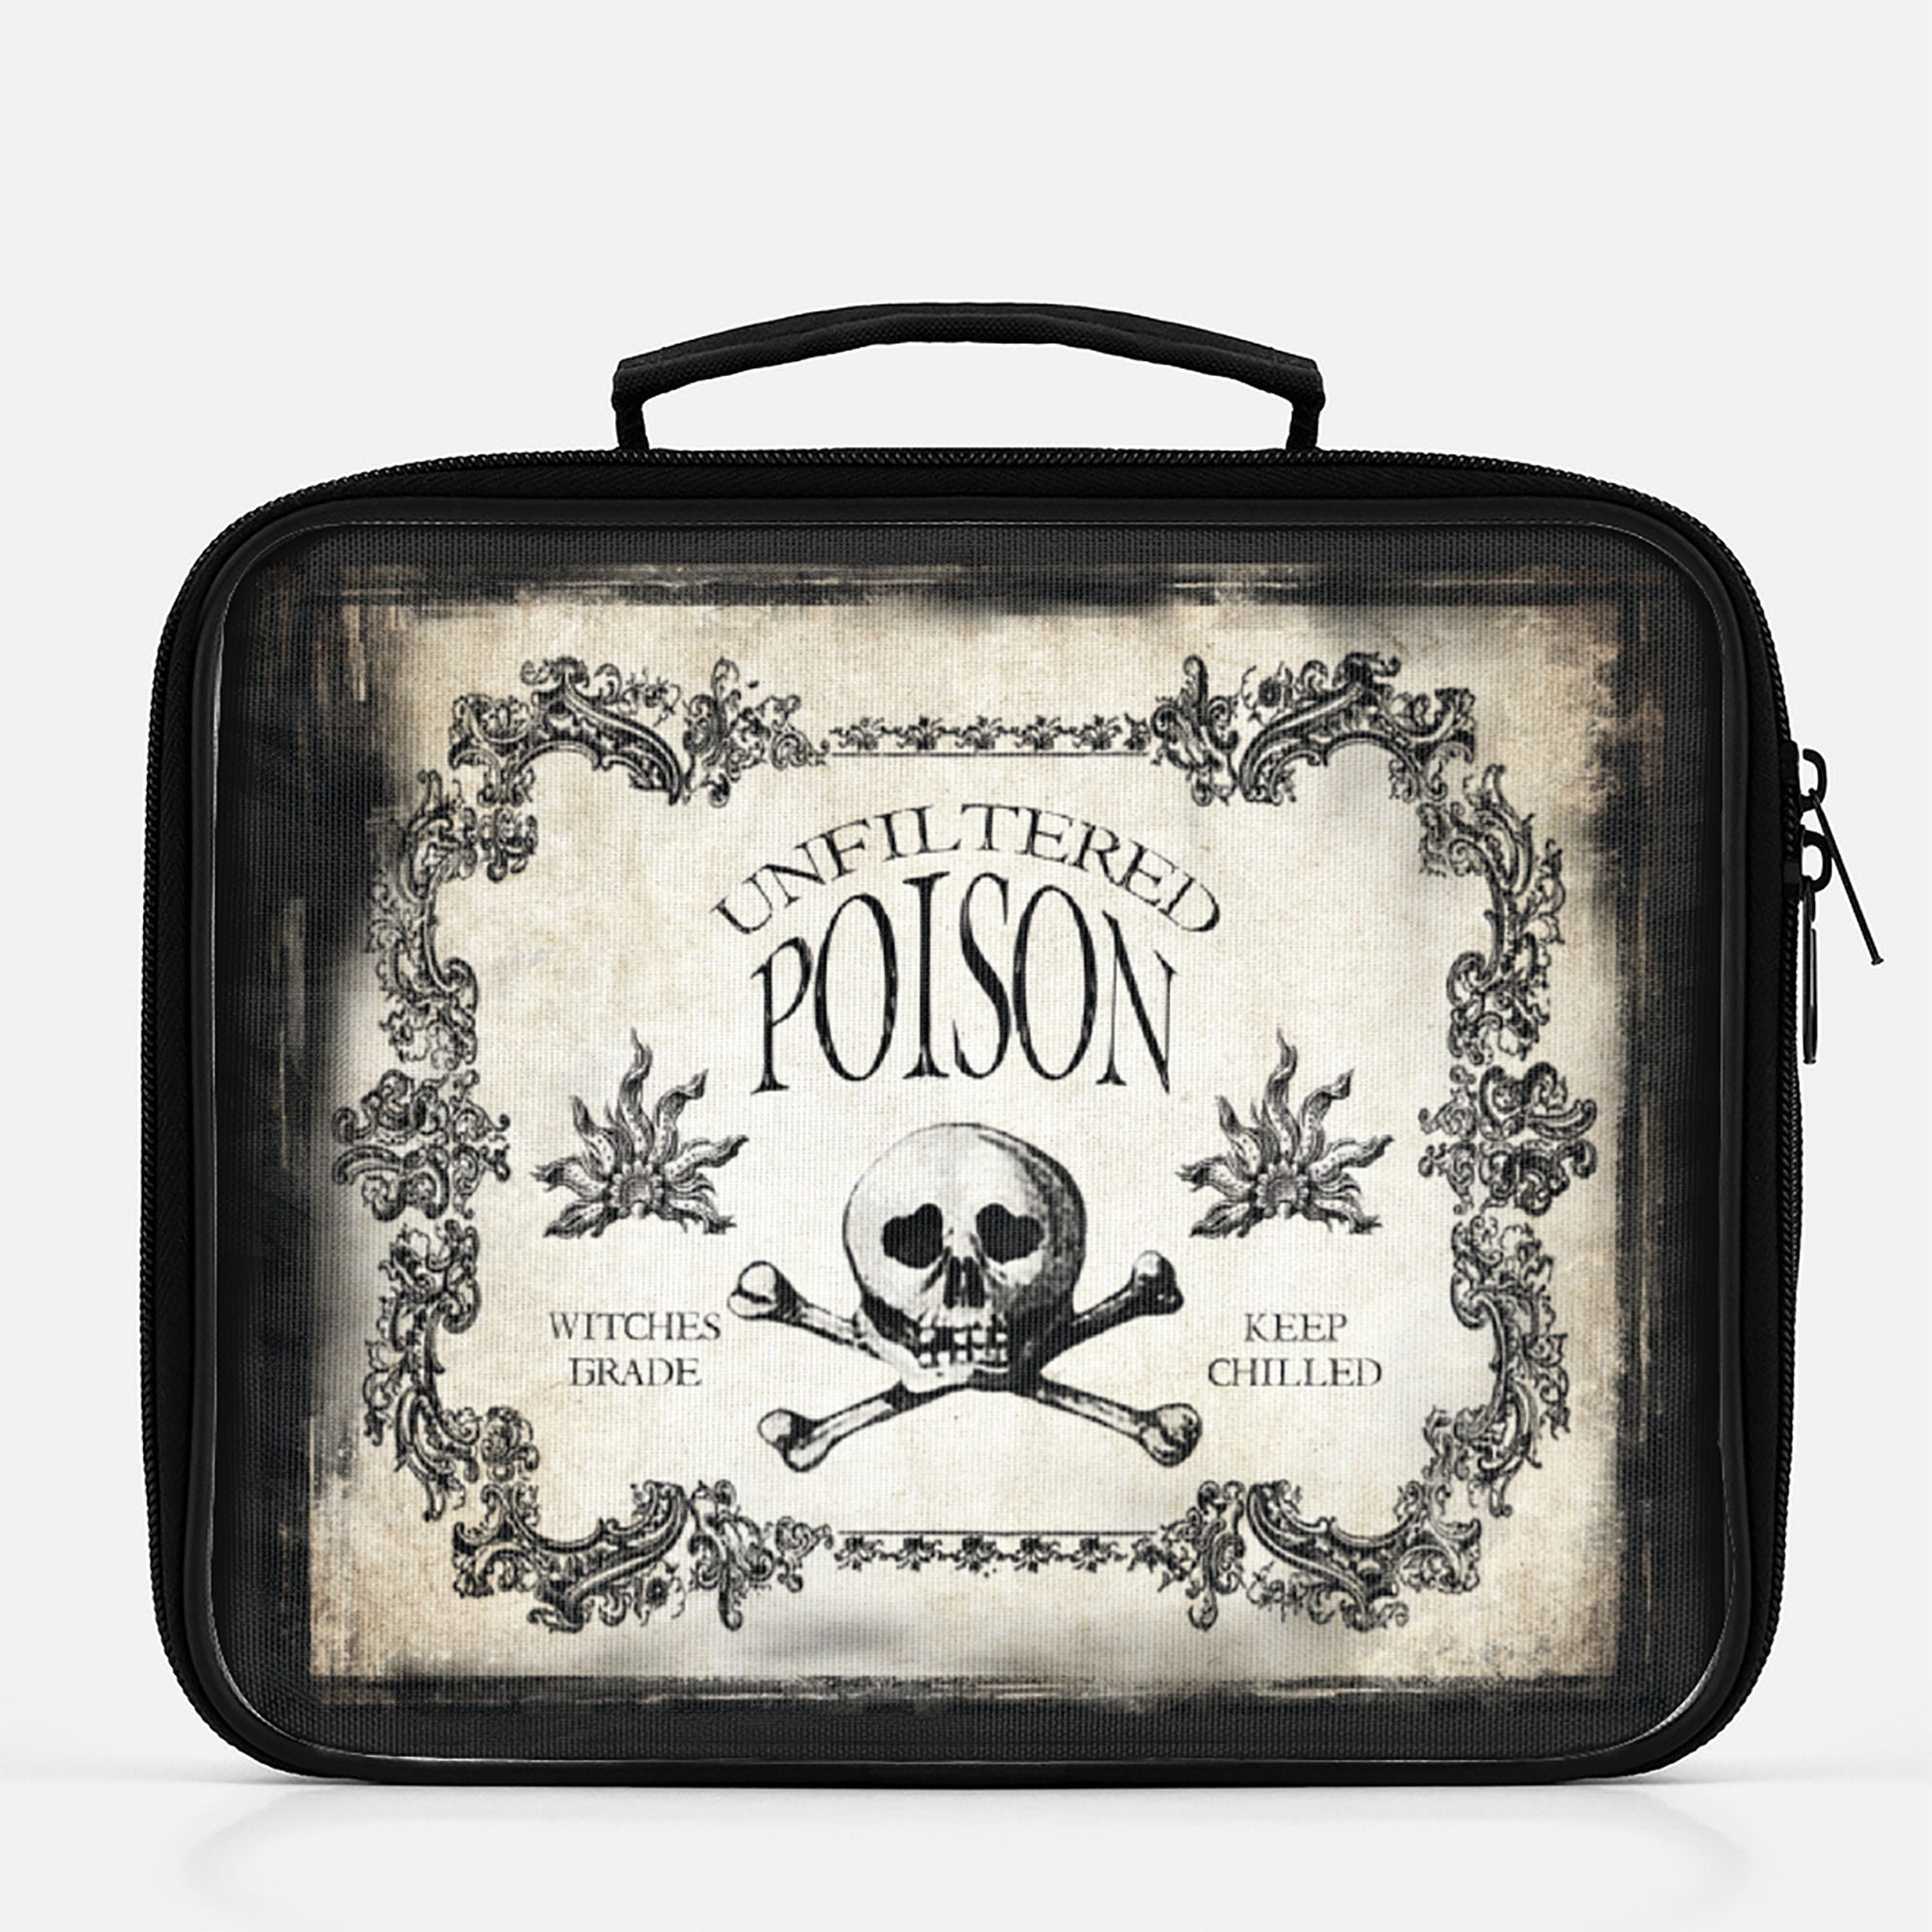 Celestial Aesthetic Lunch Bag Witchy Lunch Bag Gothic 